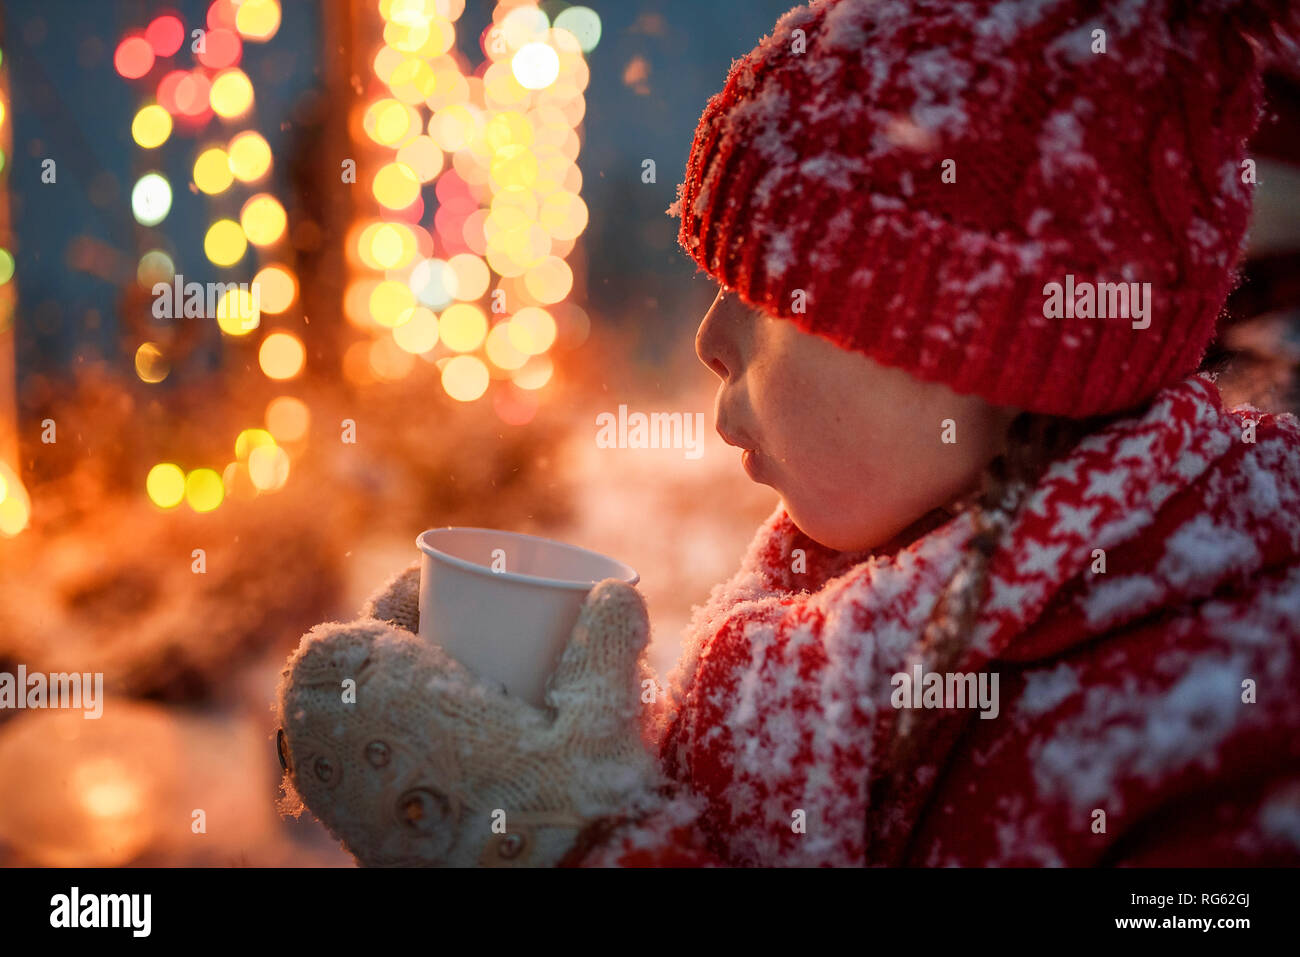 Girl standing outdoors drinking hot chocolate, United States Banque D'Images